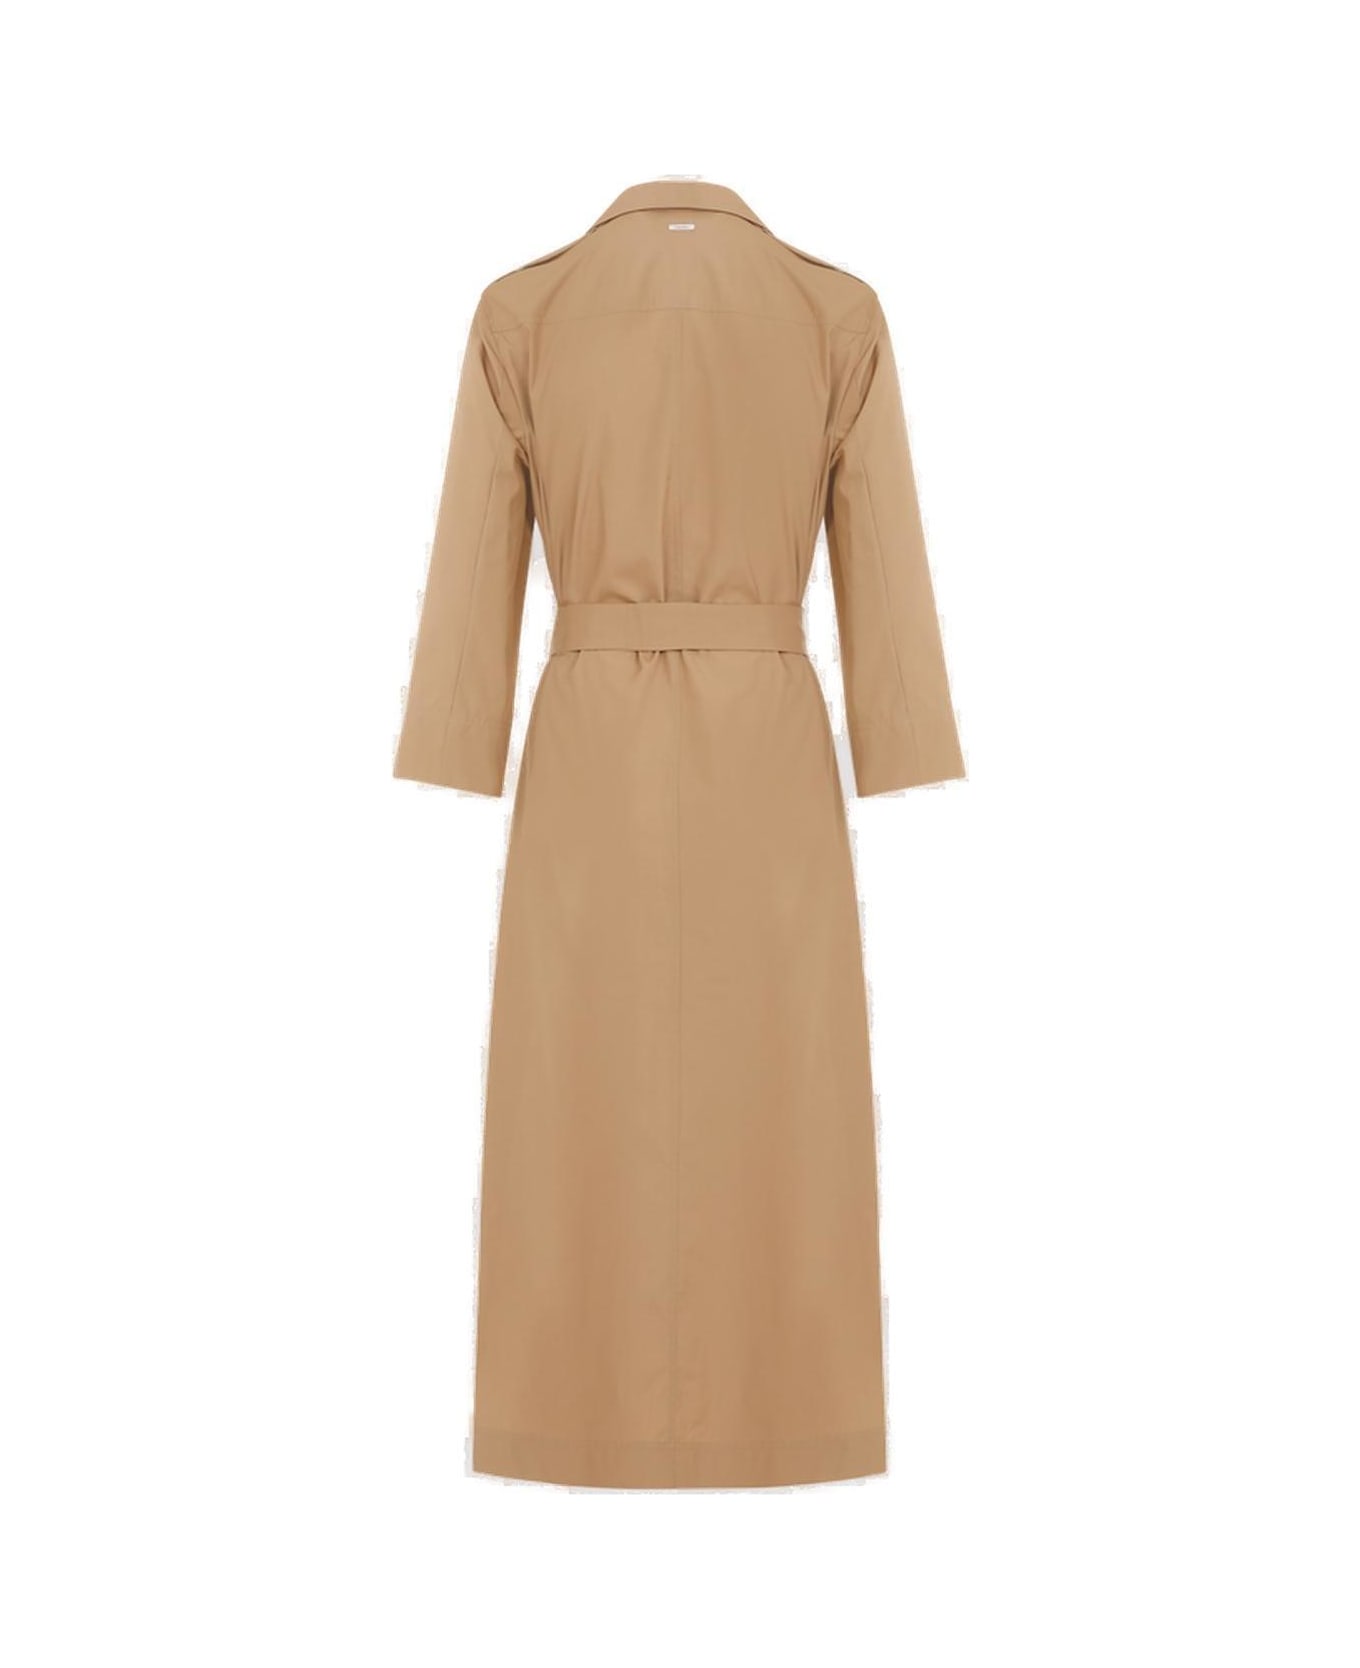 'S Max Mara Buttoned Belted Dress - BEIGE